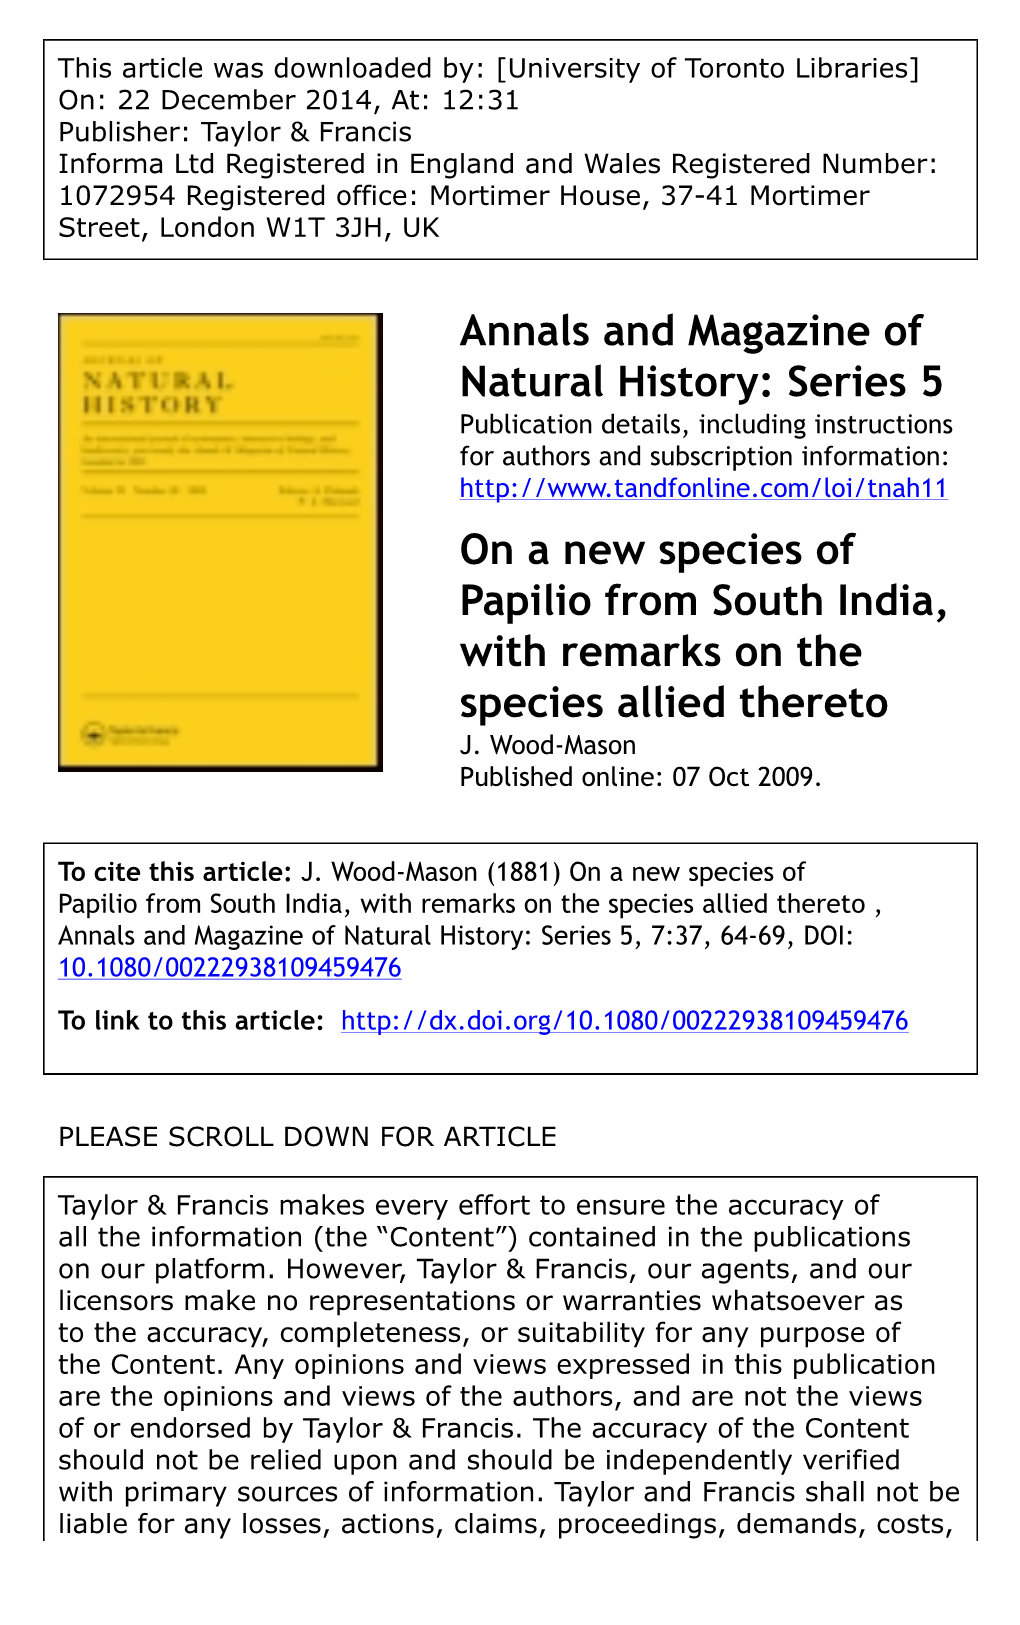 Annals and Magazine of Natural History: Series 5 on a New Species of Papilio from South India, with Remarks on the Species Allie